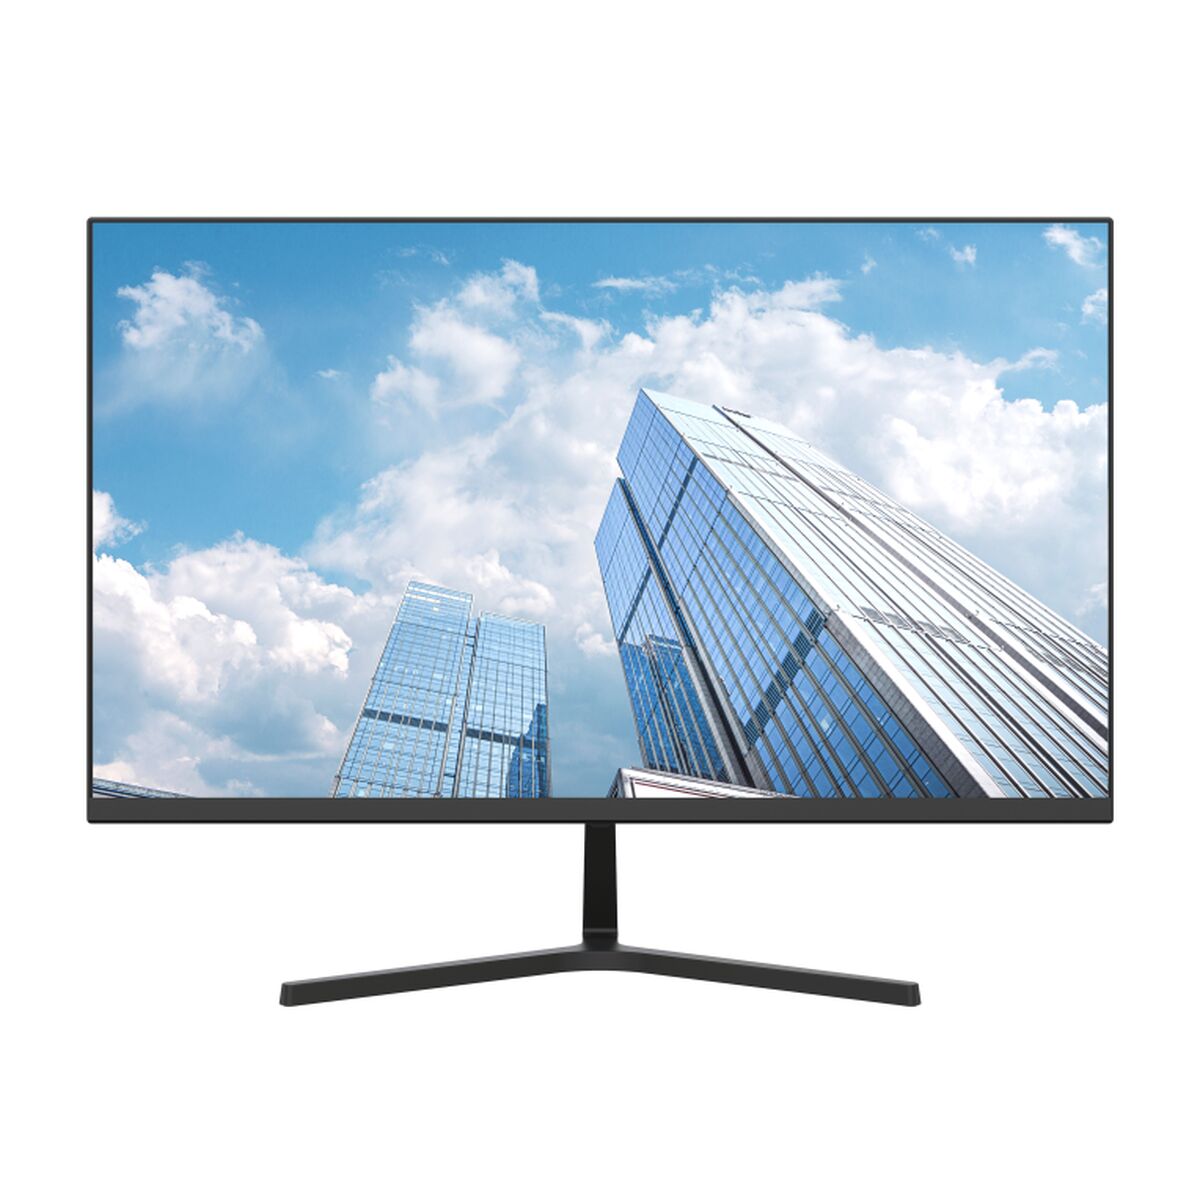 Monitor DAHUA TECHNOLOGY, DAHUA TECHNOLOGY, Computing, monitor-dahua-technology-1, Brand_DAHUA TECHNOLOGY, category-reference-2609, category-reference-2642, category-reference-2644, category-reference-t-19685, category-reference-t-19902, computers / peripherals, Condition_NEW, office, Price_100 - 200, Teleworking, RiotNook